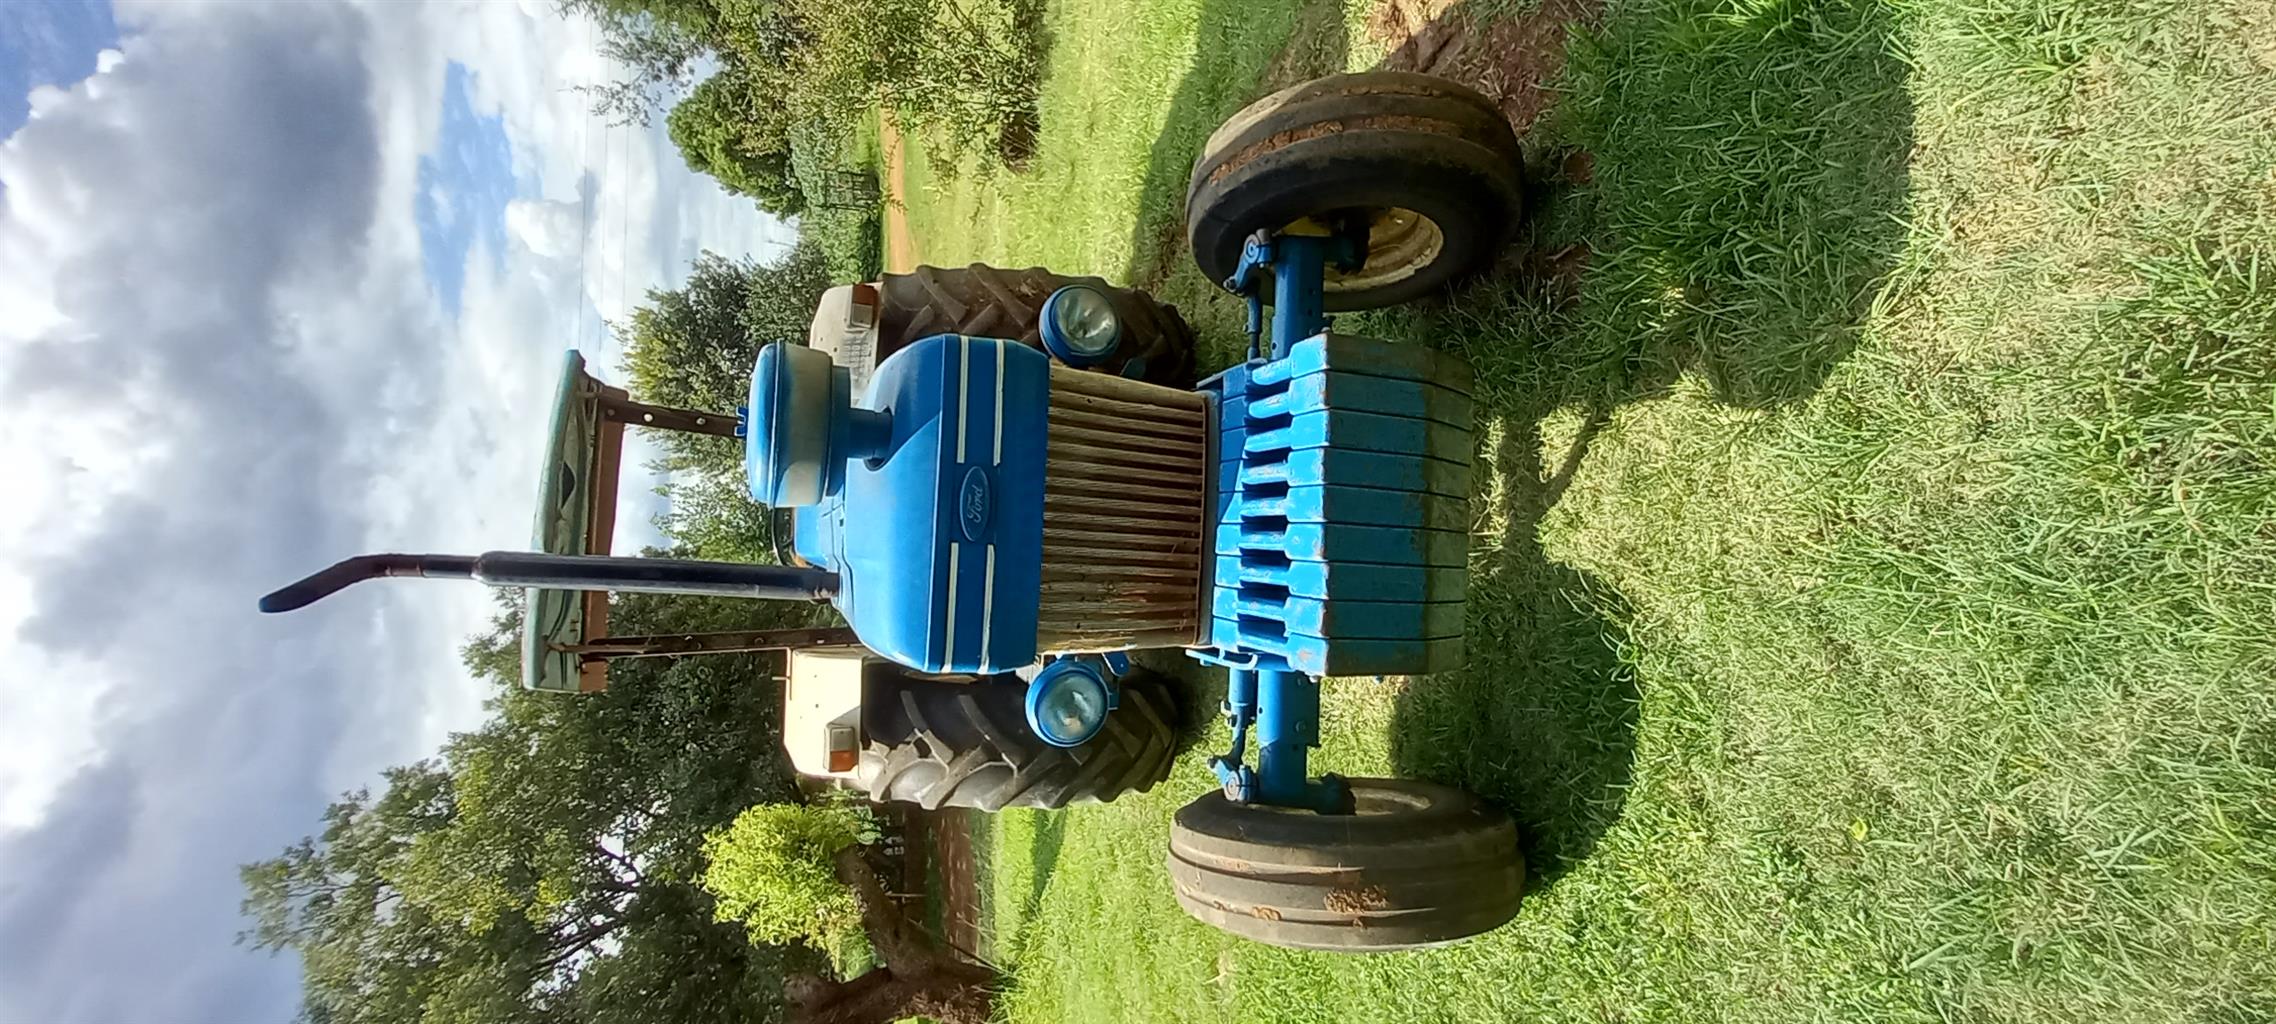 Ford 6610 for sale